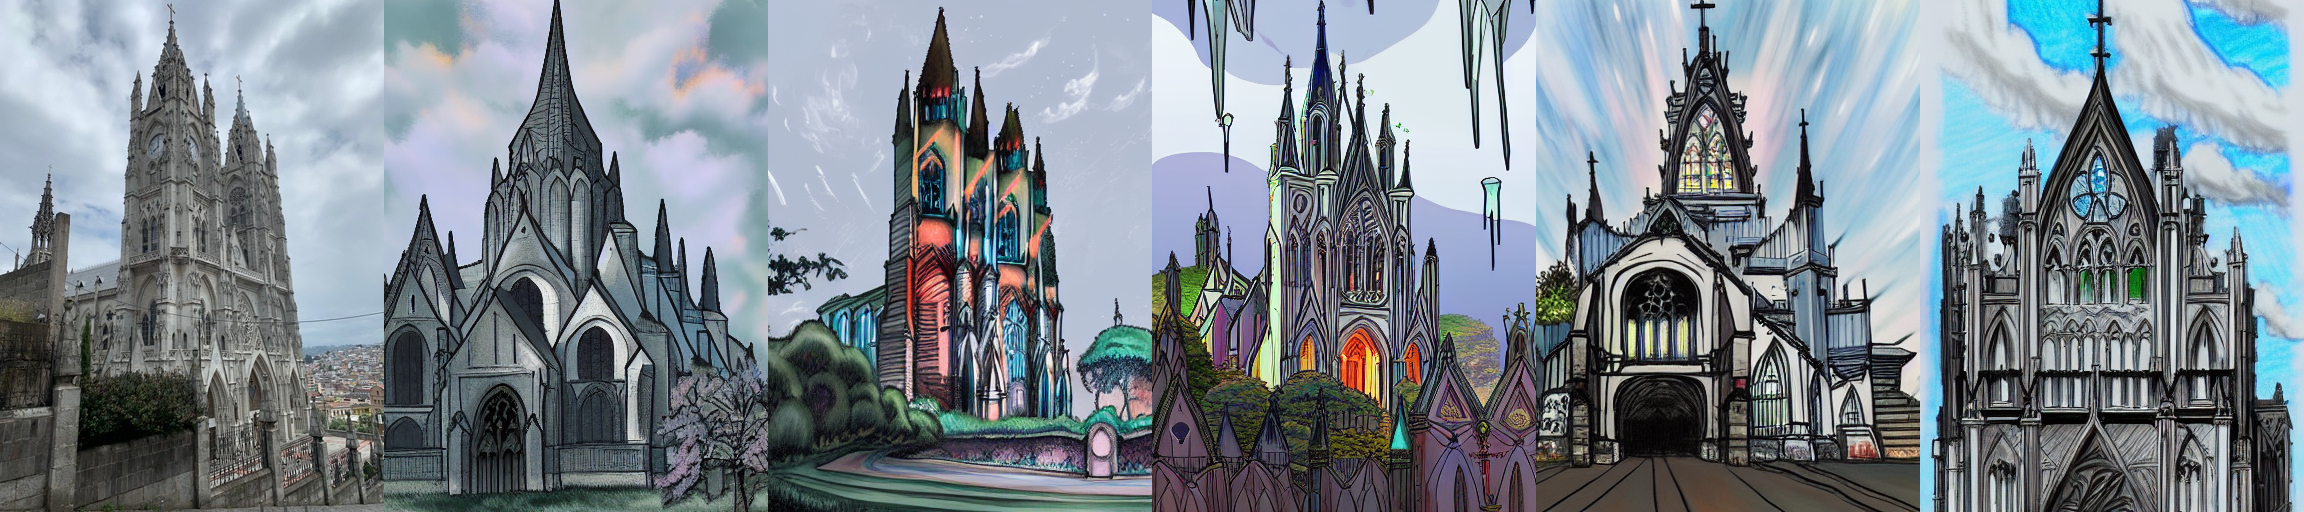 left: picture of a gothic cathedral; right: 5 ai-generated variations on that image in colorful illustrated style